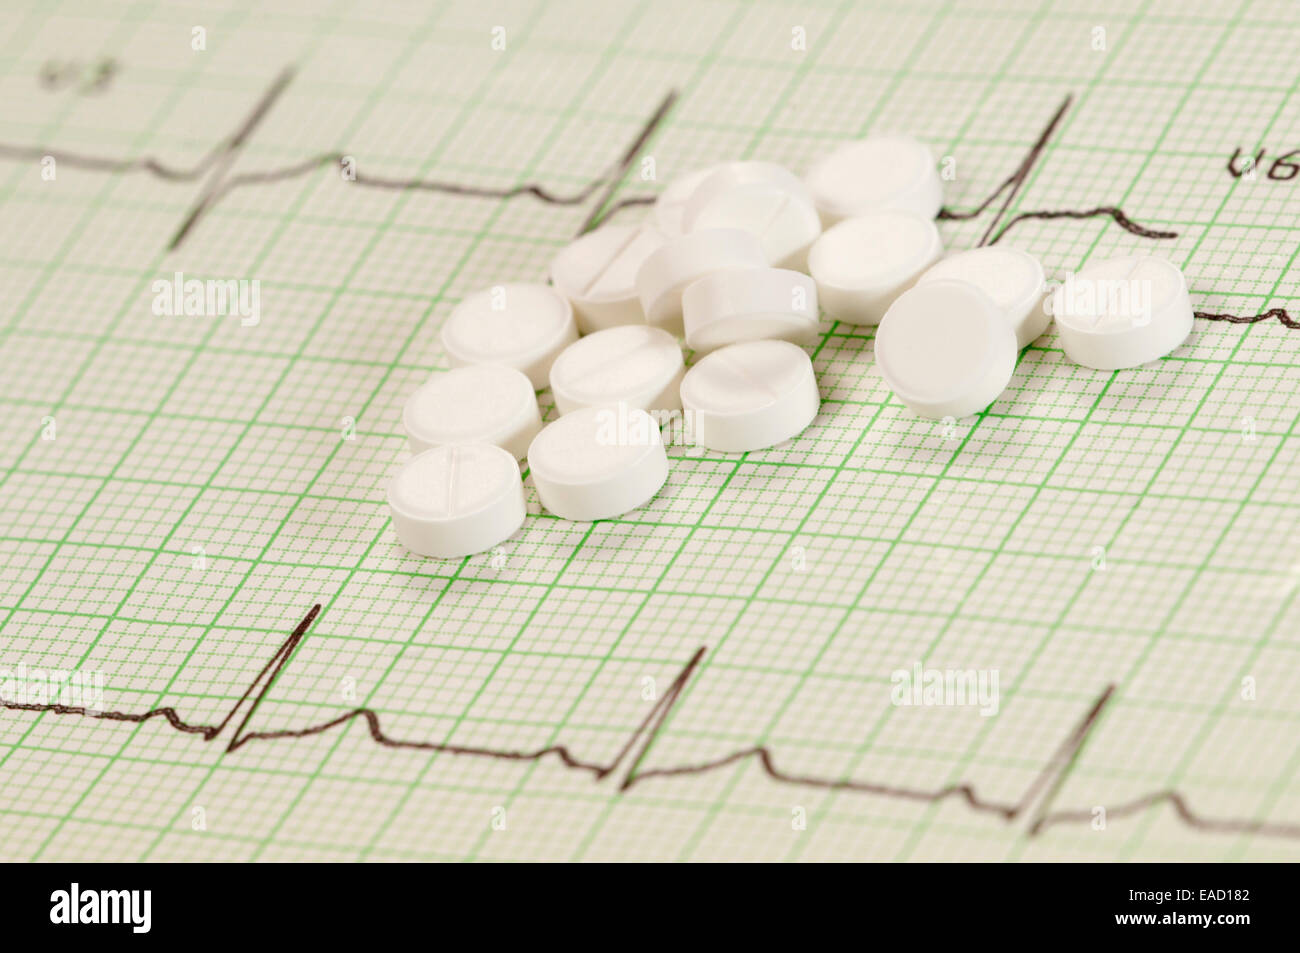 Tablets on electrocardiogram paper, closeup shot, local focus Stock Photo